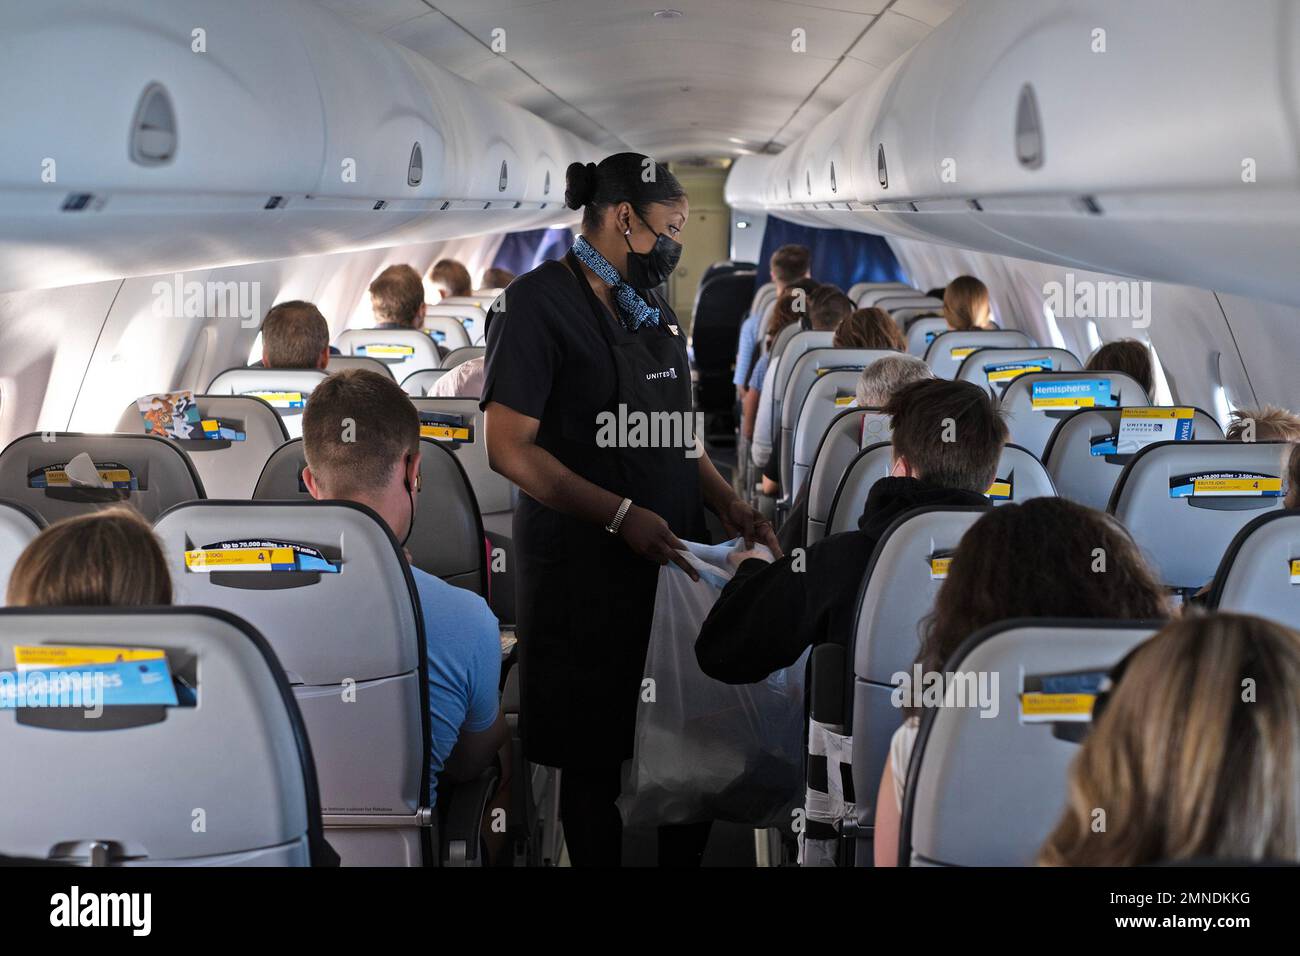 A flight attendant collects trash from passengers. Stock Photo